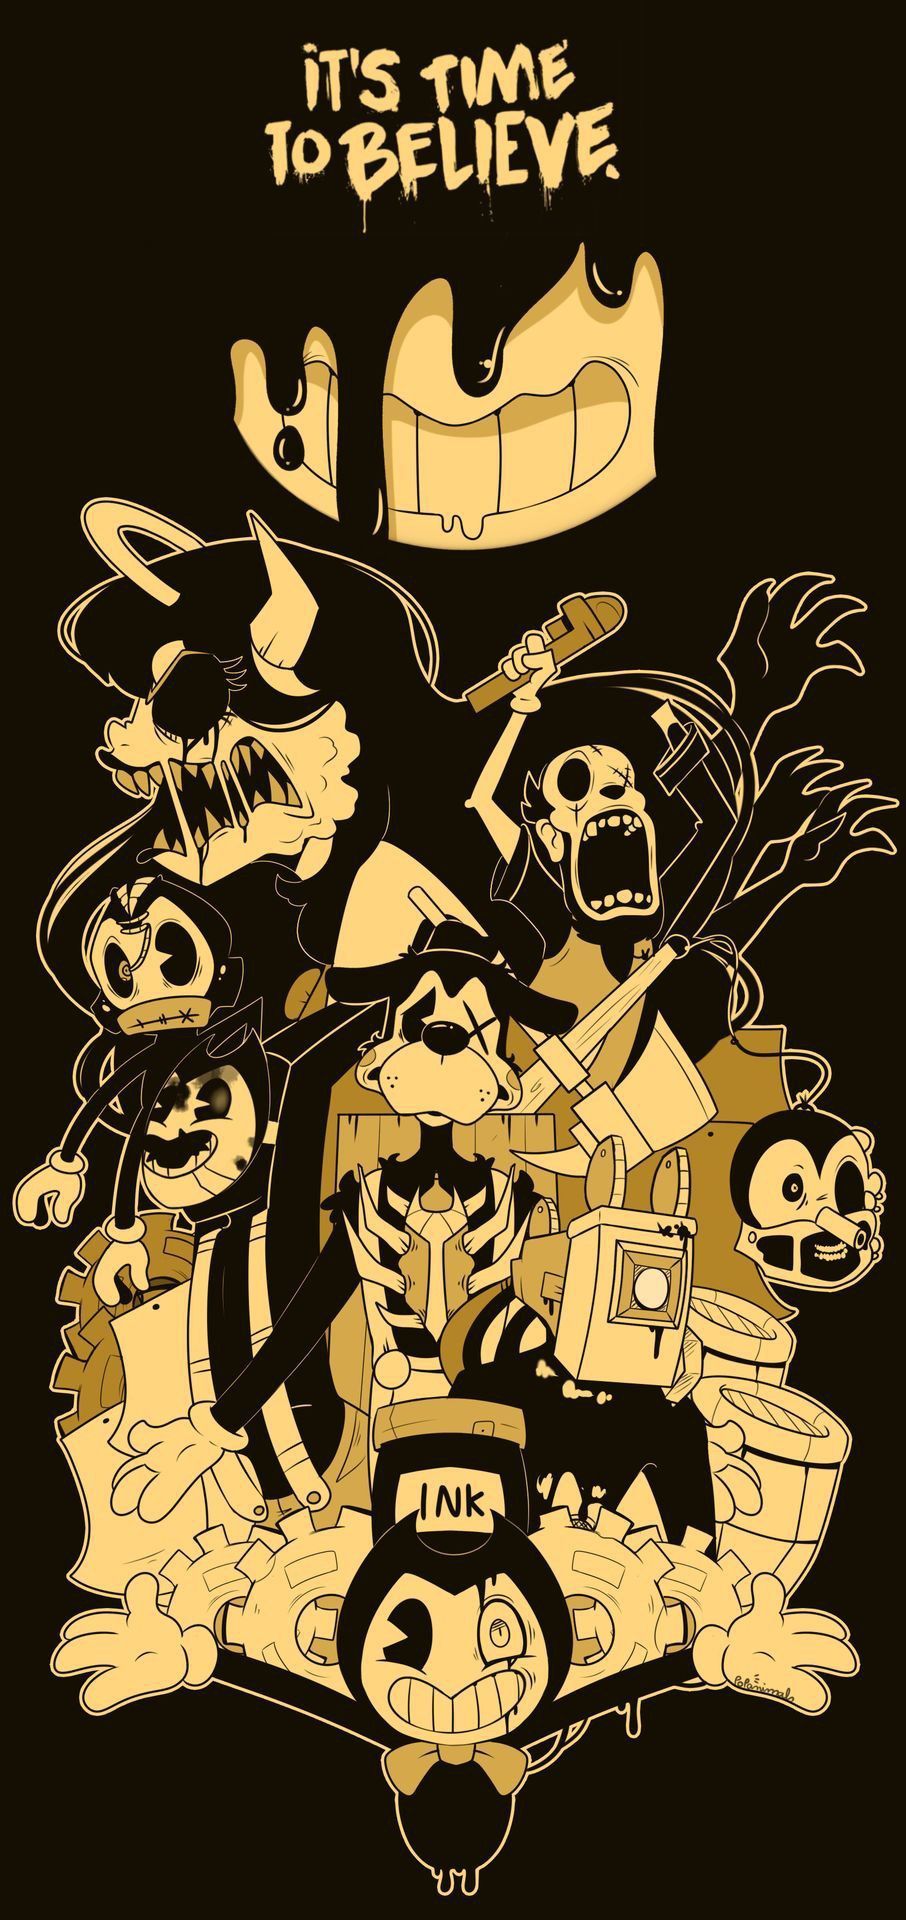 Download Bendy And The Ink Machine wallpapers for mobile phone